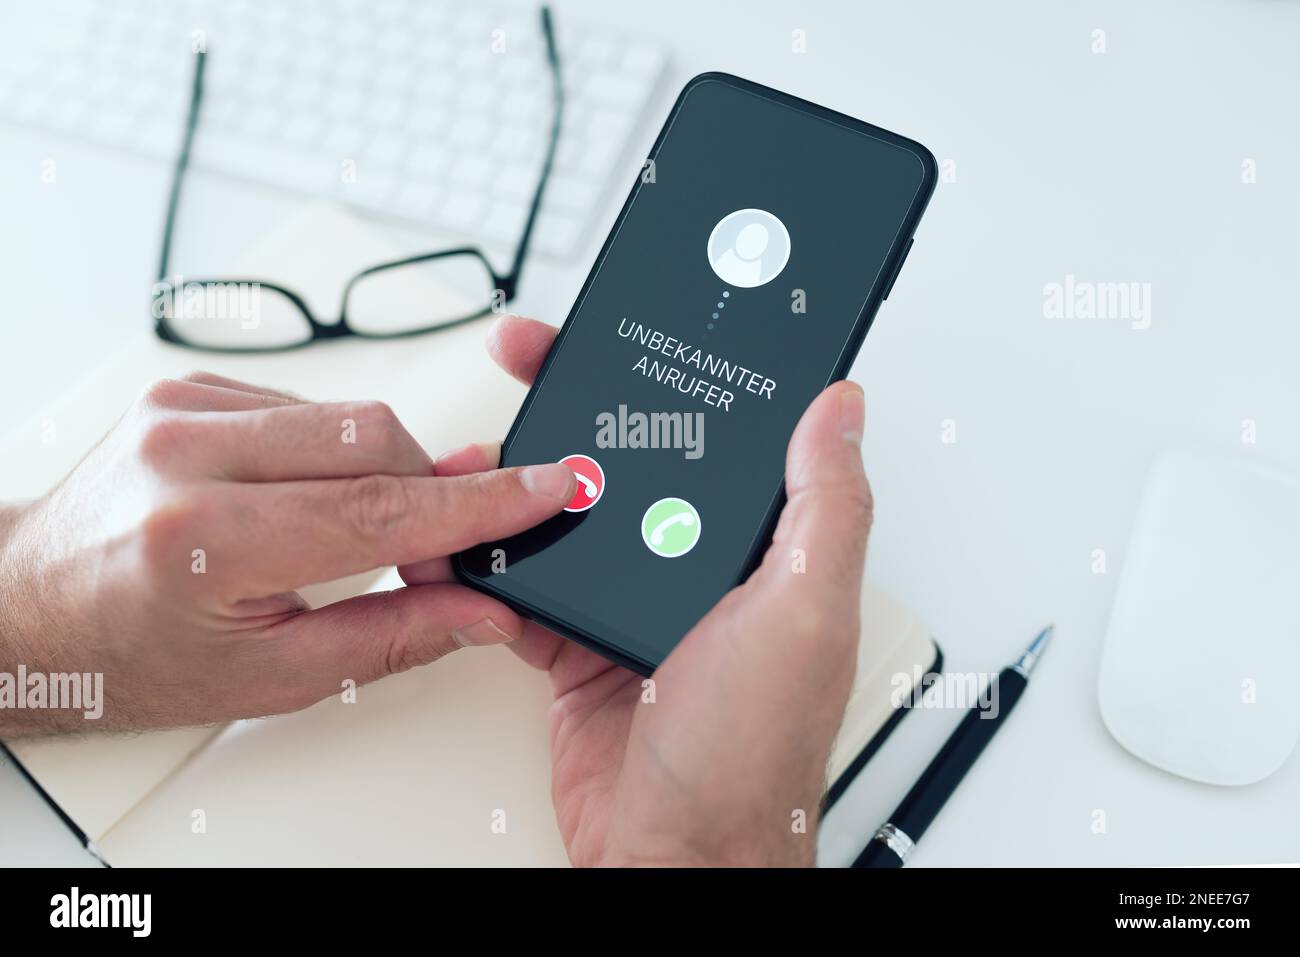 close-up view of person rejecting call from unknown number with text UNBEKANNTER ANRUFER, German for unknown caller, on smartphone, phone scam and Stock Photo